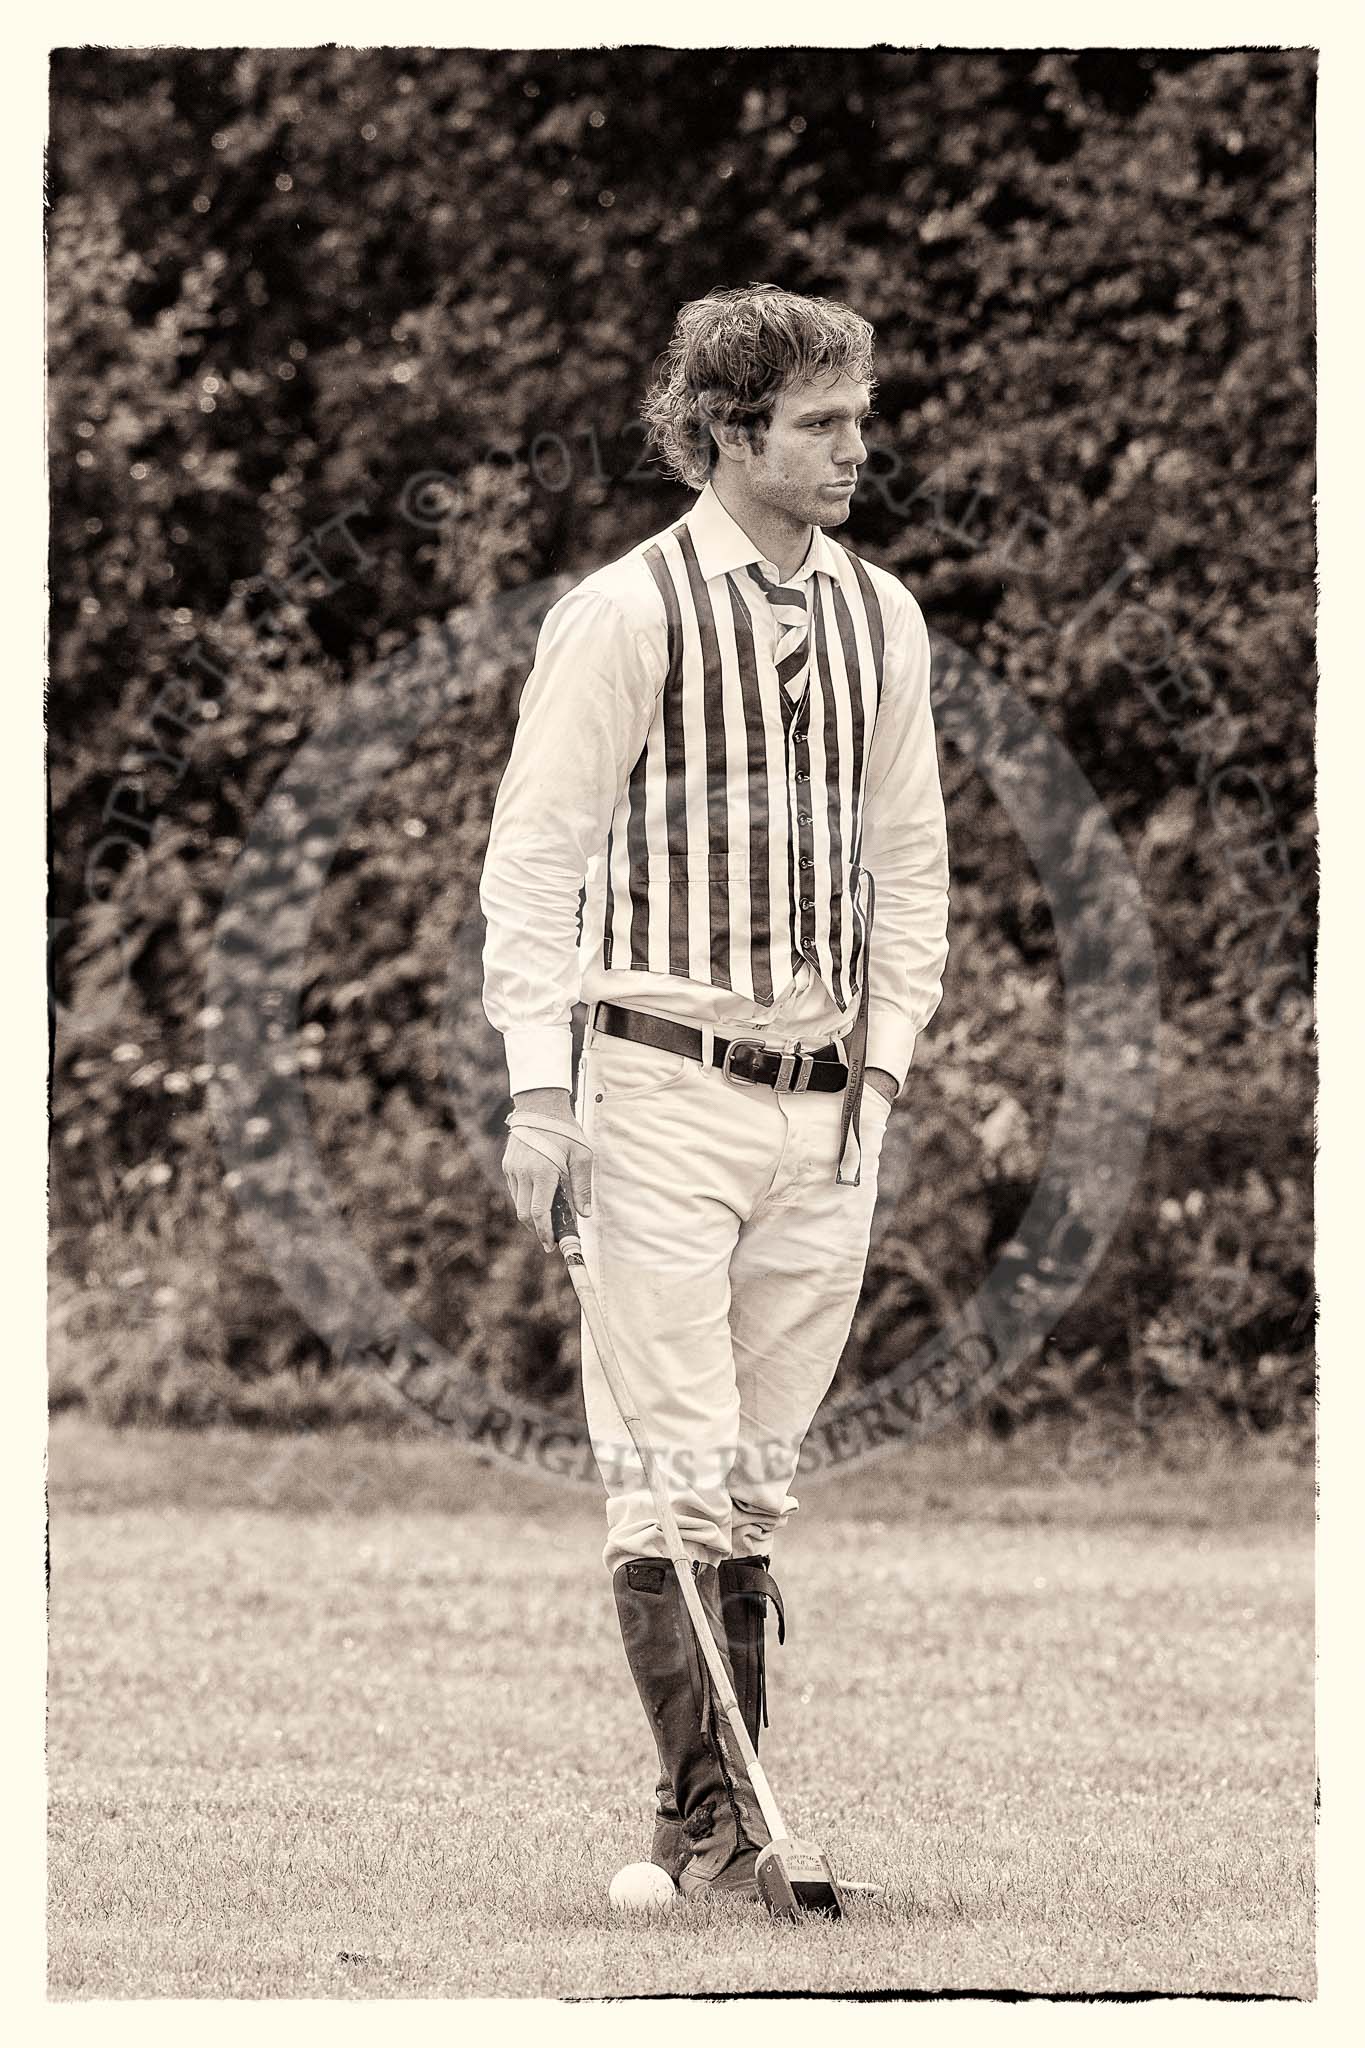 7th Heritage Polo Cup semi-finals: Umpire Guy Higginson in O.H.Hewett silk vest and tie - T.M.Lewin Luxury Twill Shirt..
Hurtwood Park Polo Club,
Ewhurst Green,
Surrey,
United Kingdom,
on 04 August 2012 at 12:51, image #84